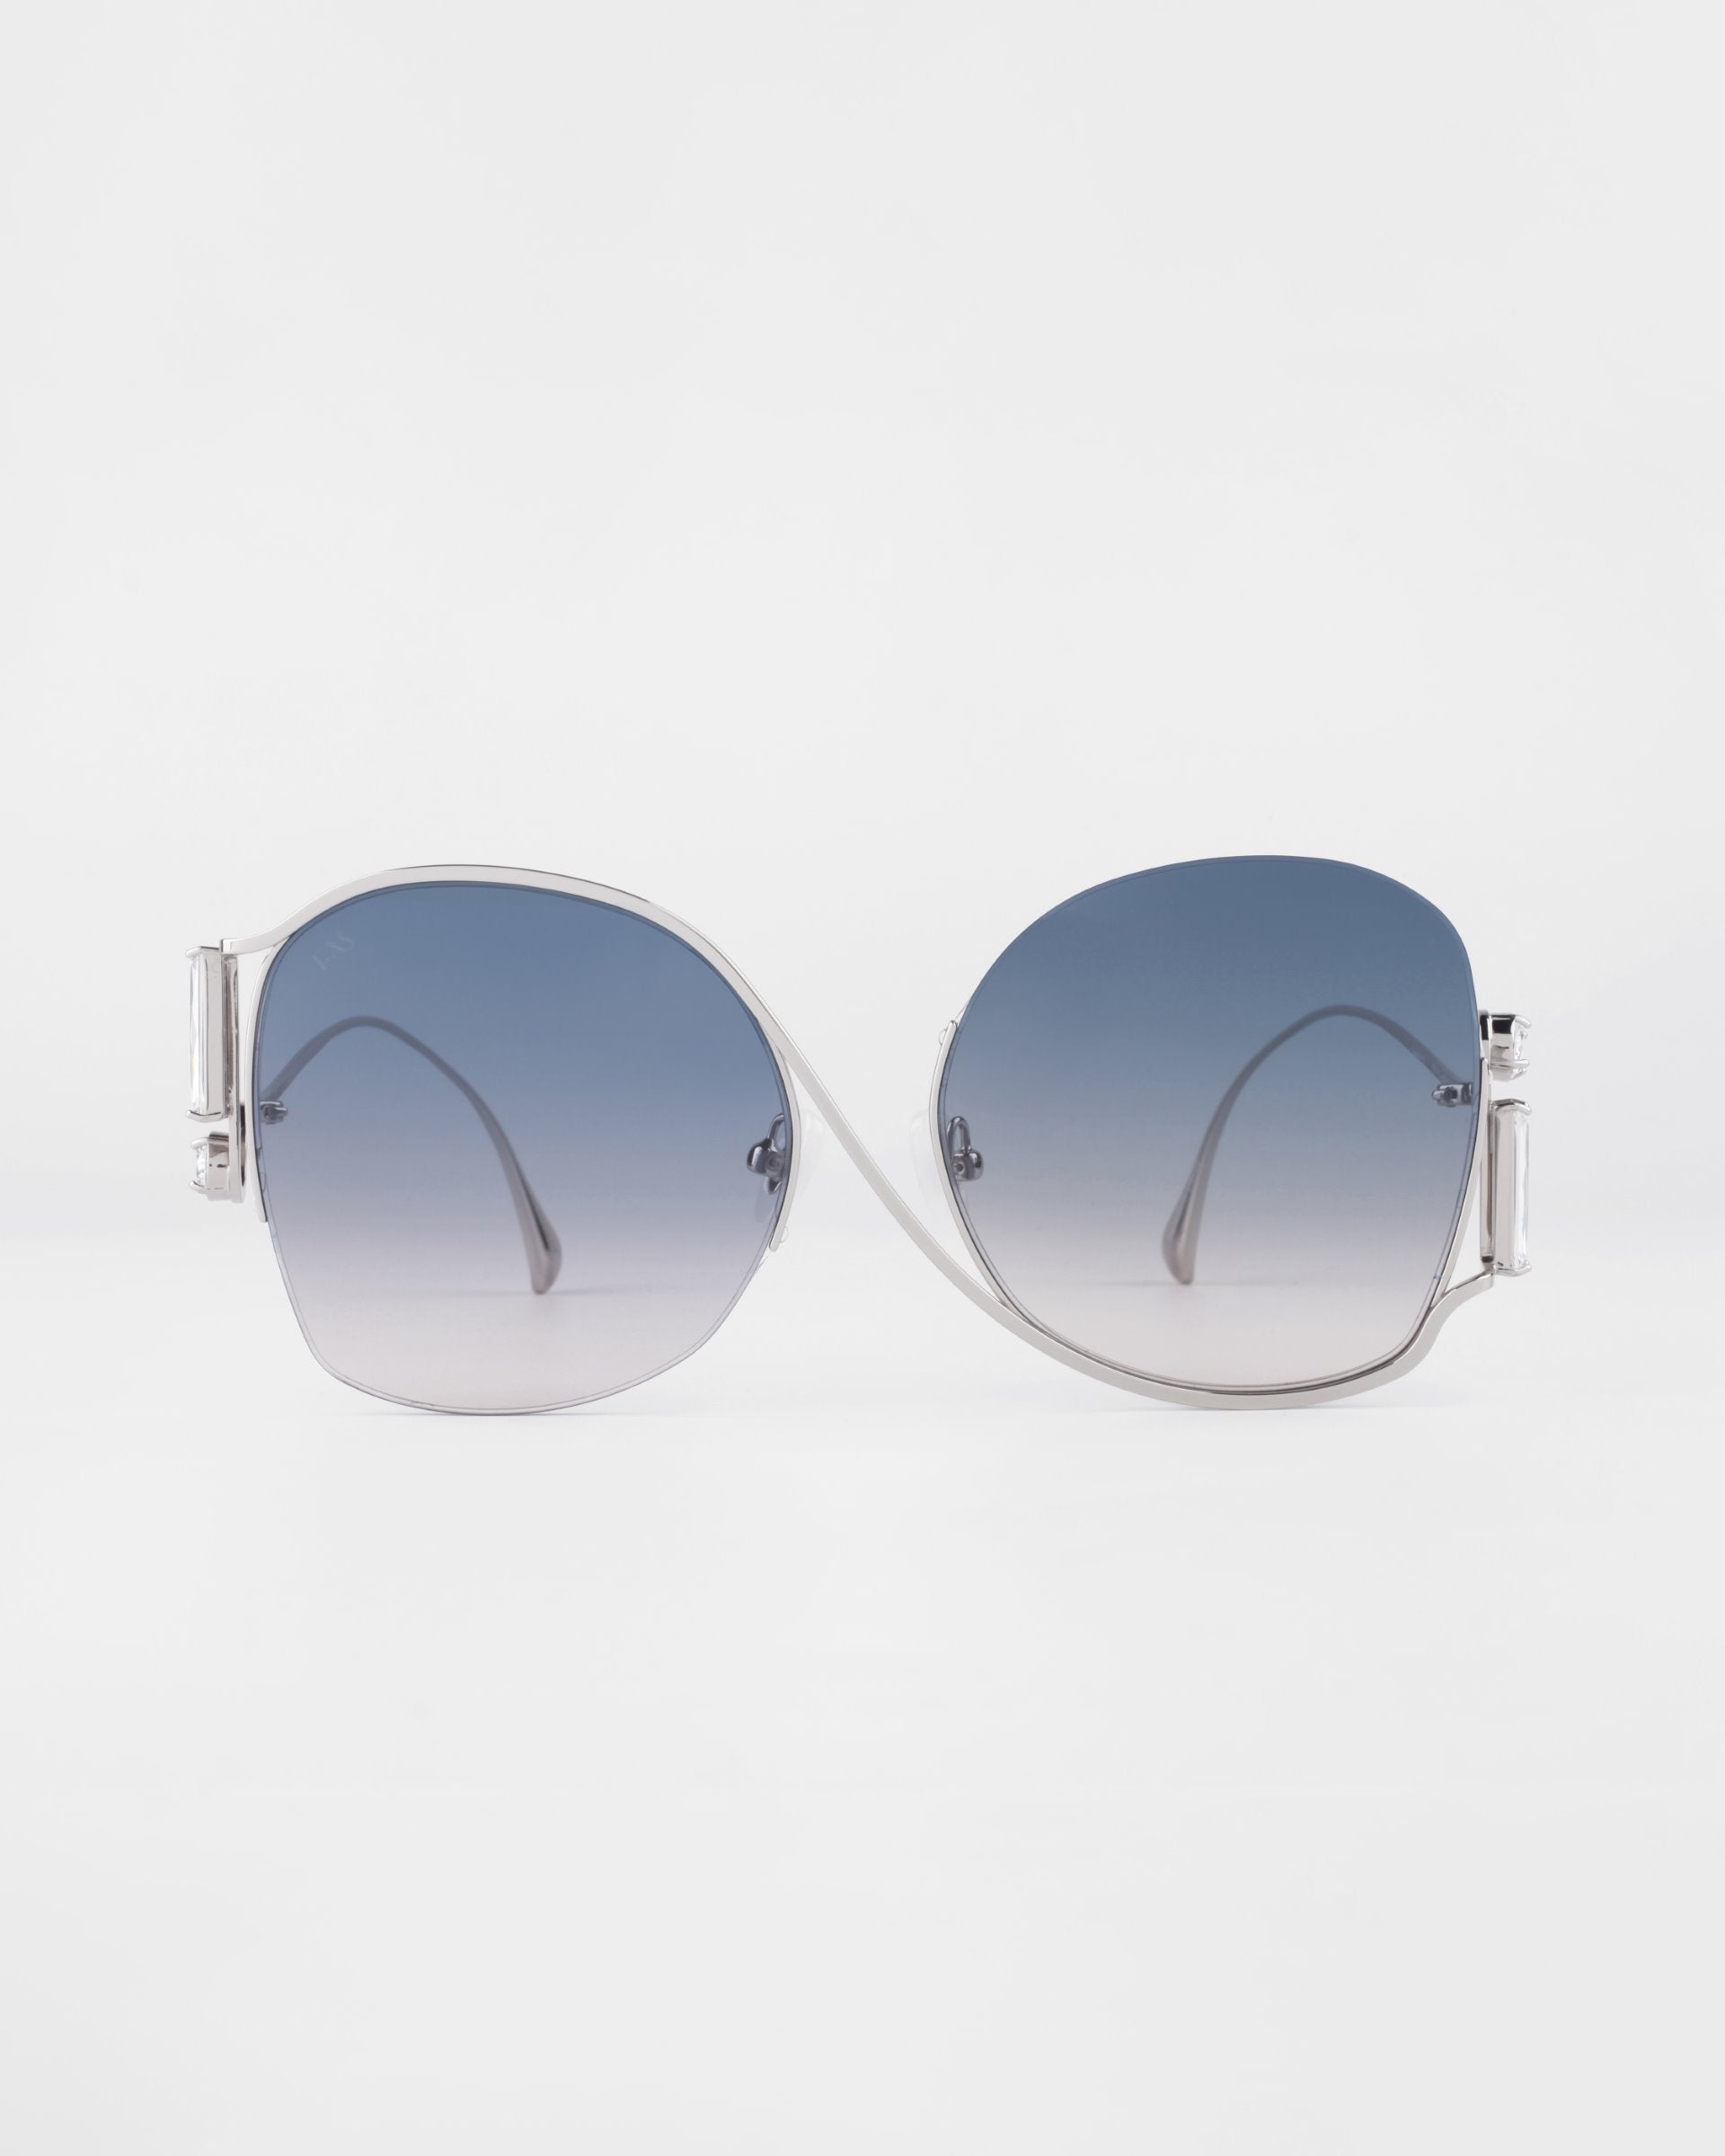 A pair of luxurious For Art's Sake® Sapphire sunglasses with silver frames and large, gradient lenses. The lenses transition from dark blue at the top to lighter shades towards the bottom. Crystal embellishments add a touch of elegance. The background is white, making the sunglasses the focal point.